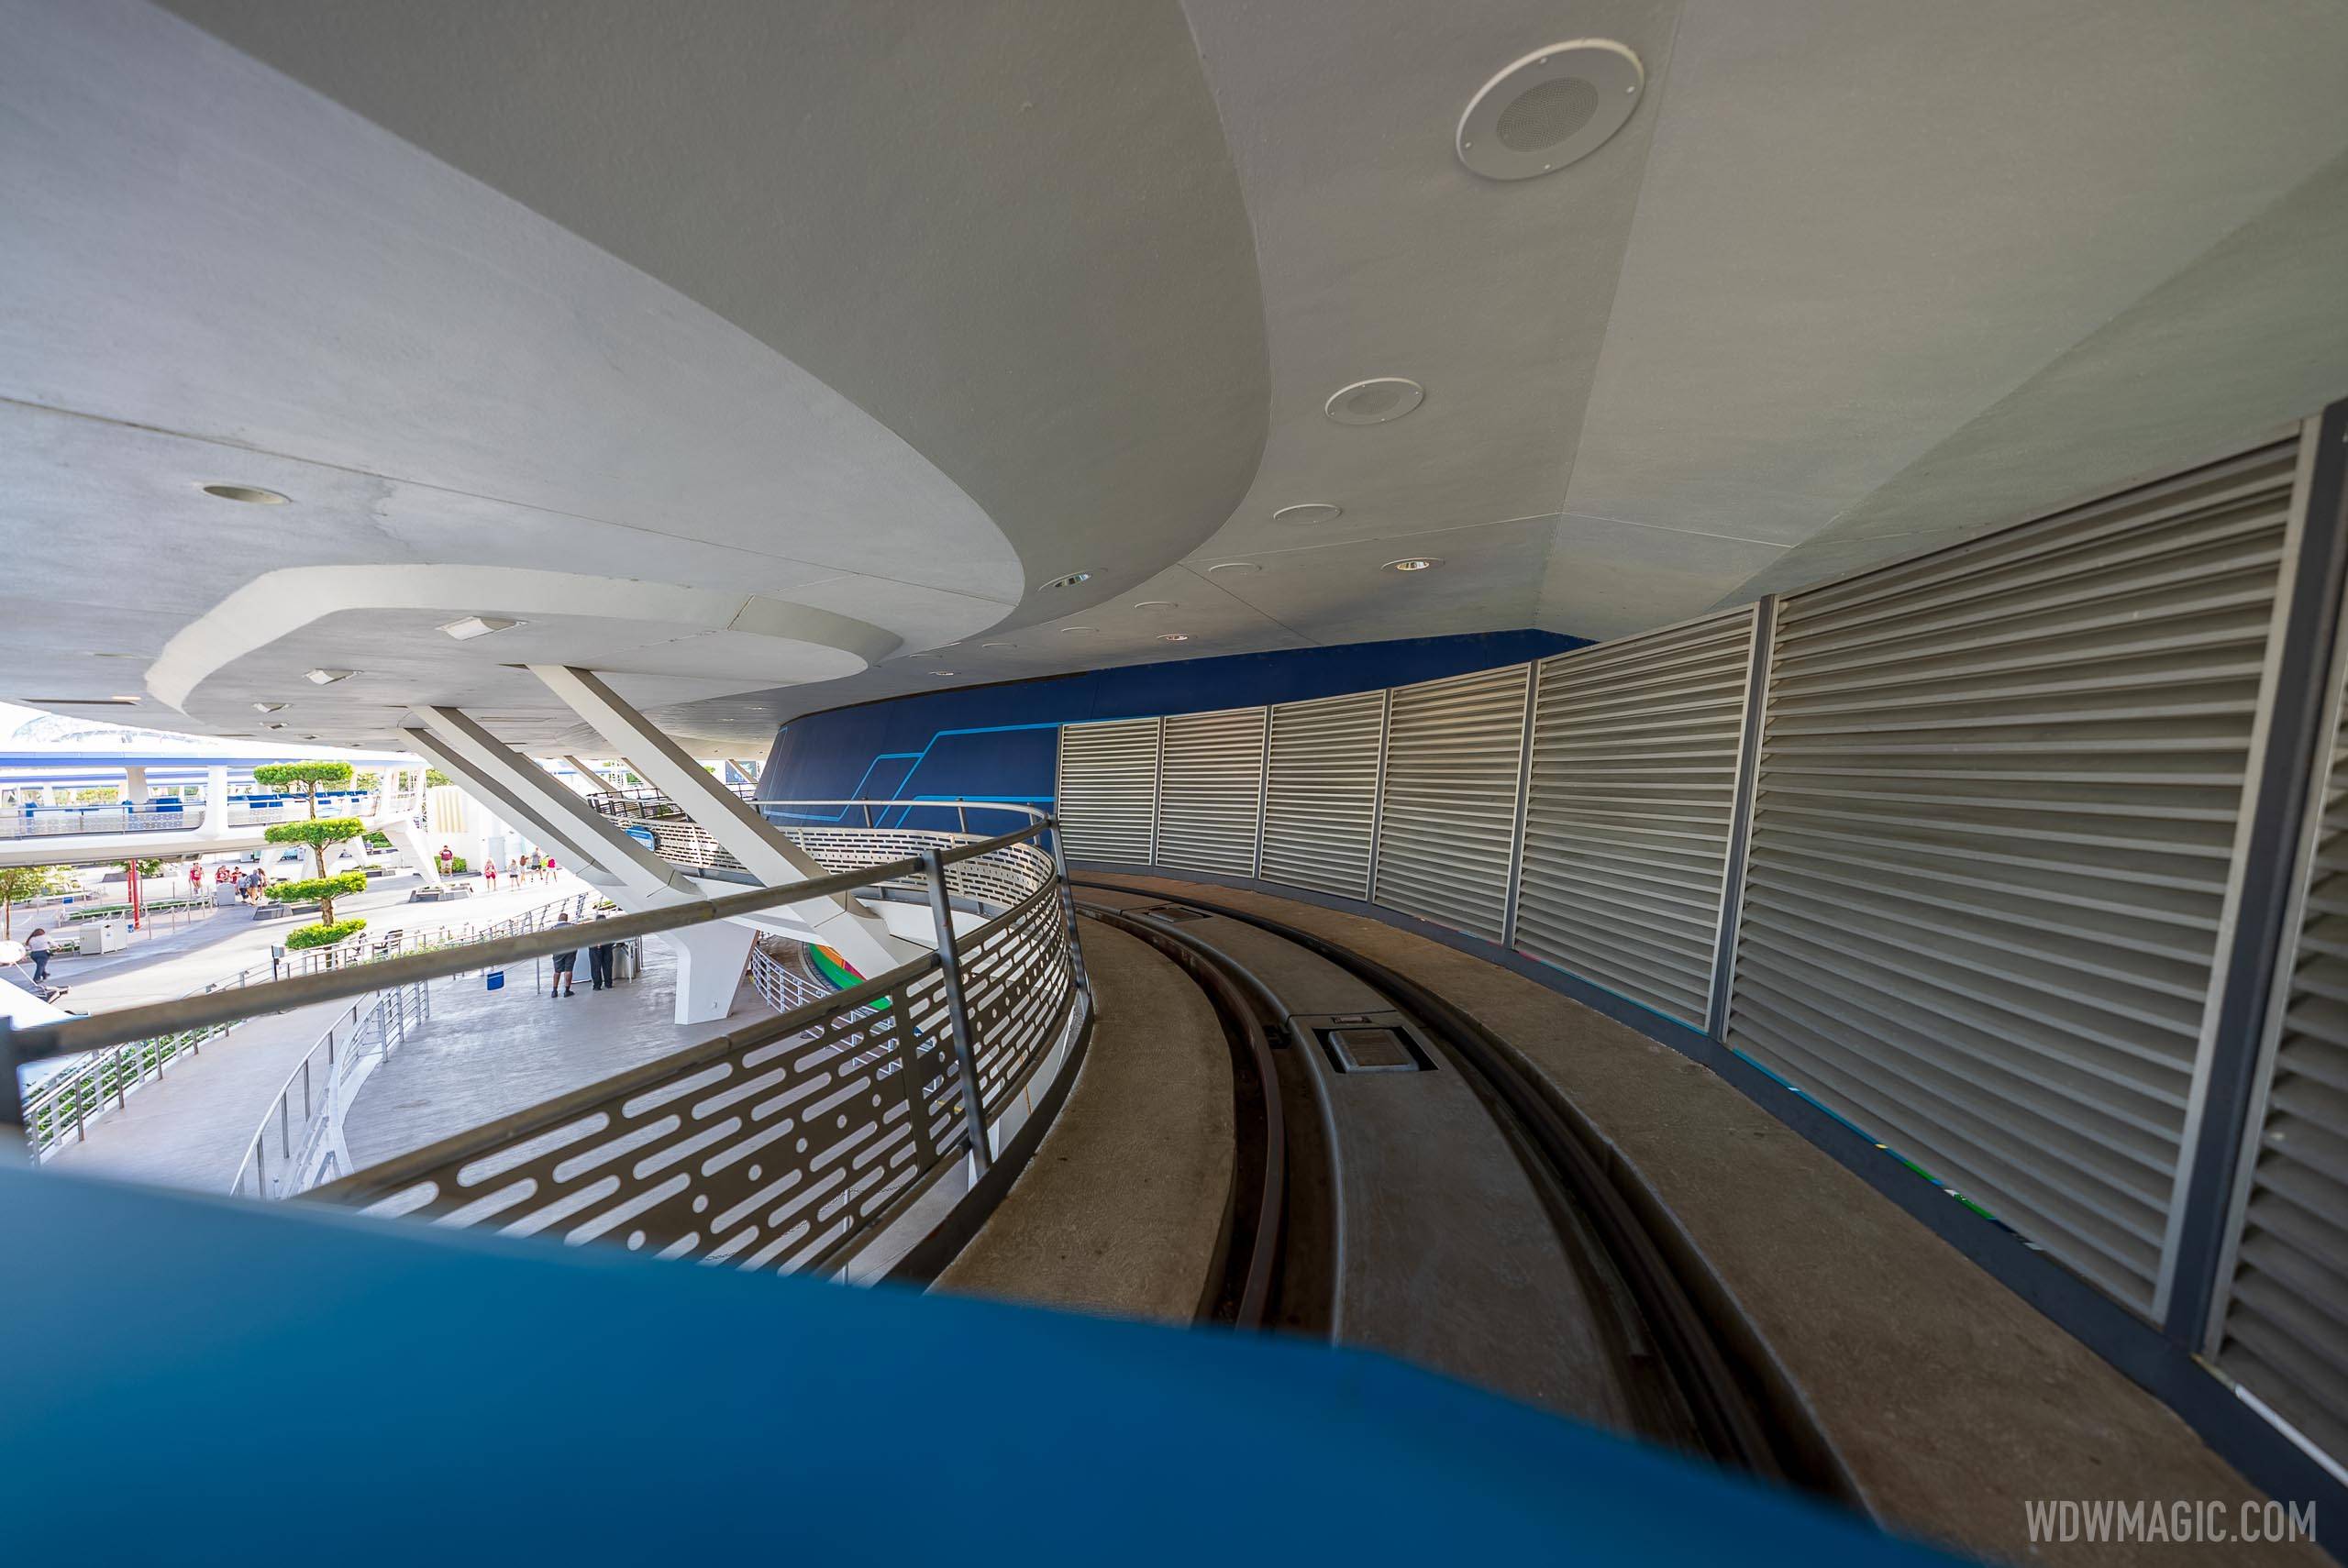 Tomorrowland Transit Authority PeopleMover refurbishment extends to almost the end of the year